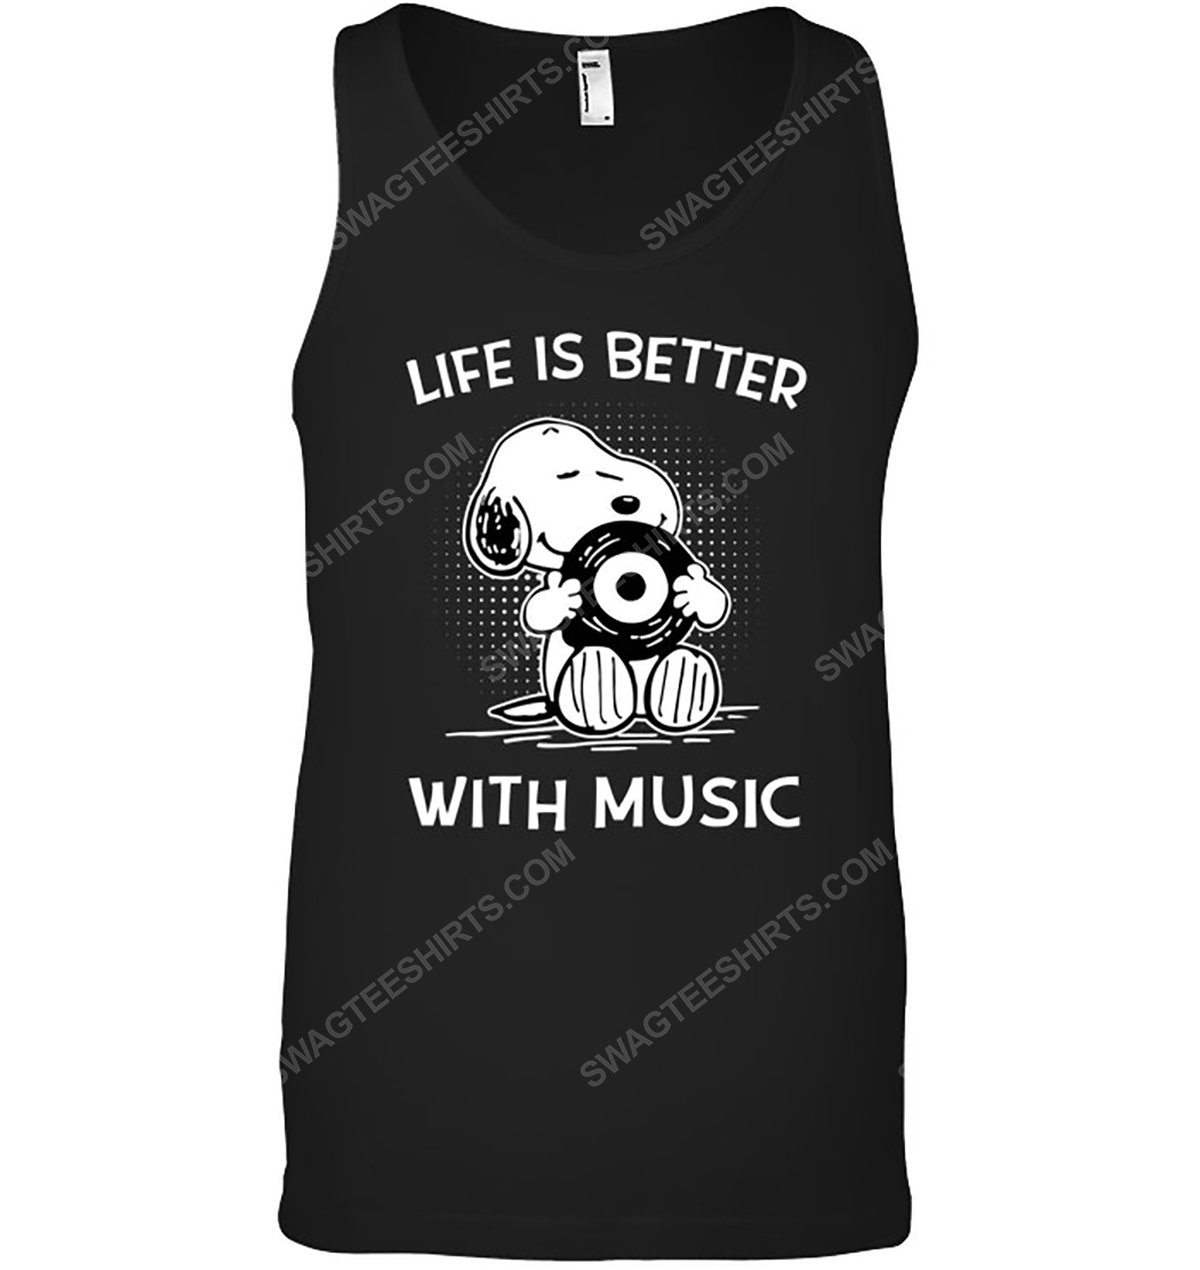 The peanuts snoopy life is better with music tank top 1